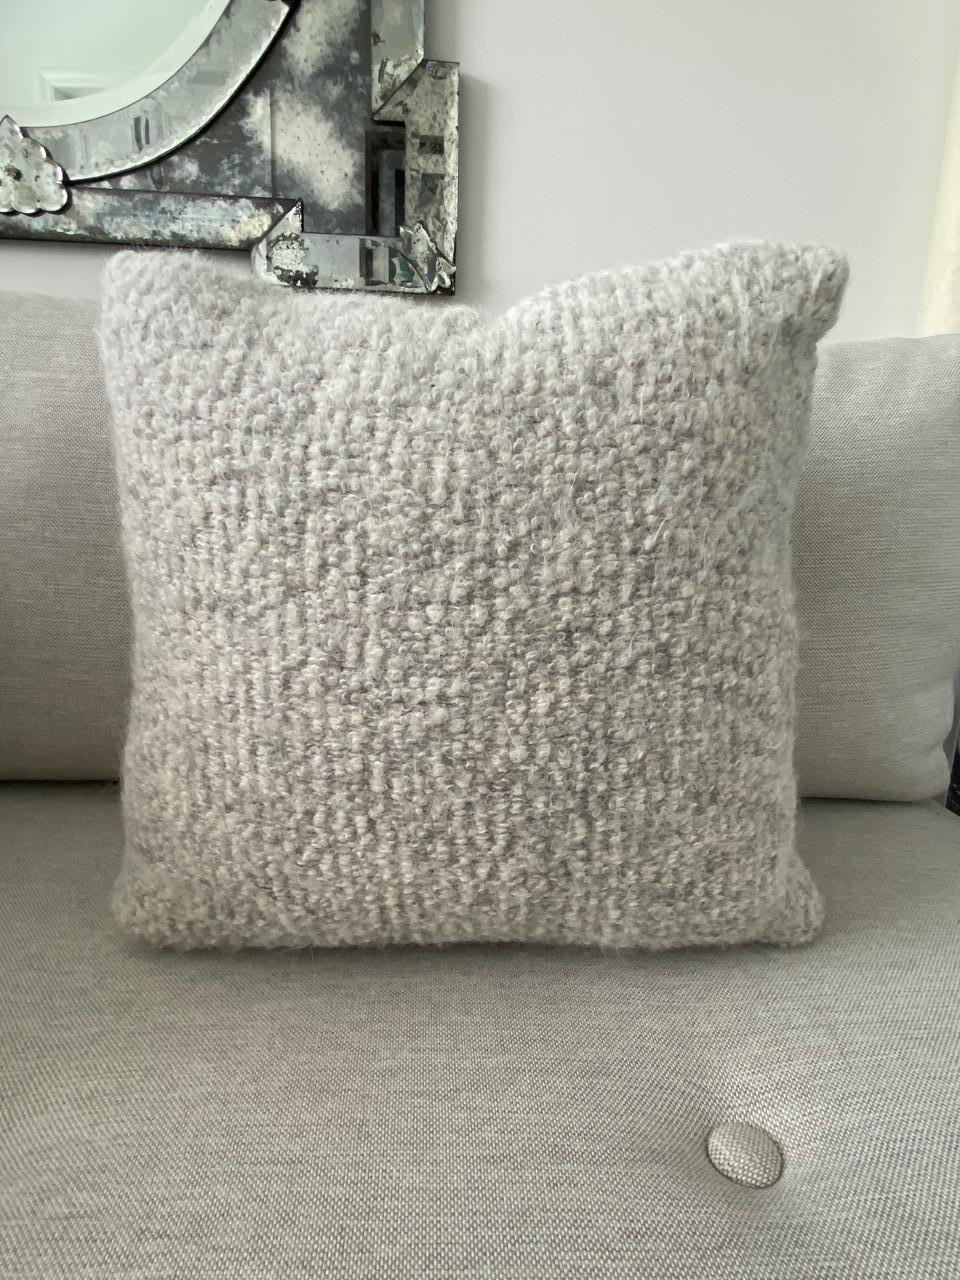 Handcrafted pillow made with Pierre Frey’s Scarlette boucle in color Plume, featuring a blend of alpaca, mohair, and merino wools to create this stunning woven texture. The reverse side of the pillow is equally as beautiful and features full grain